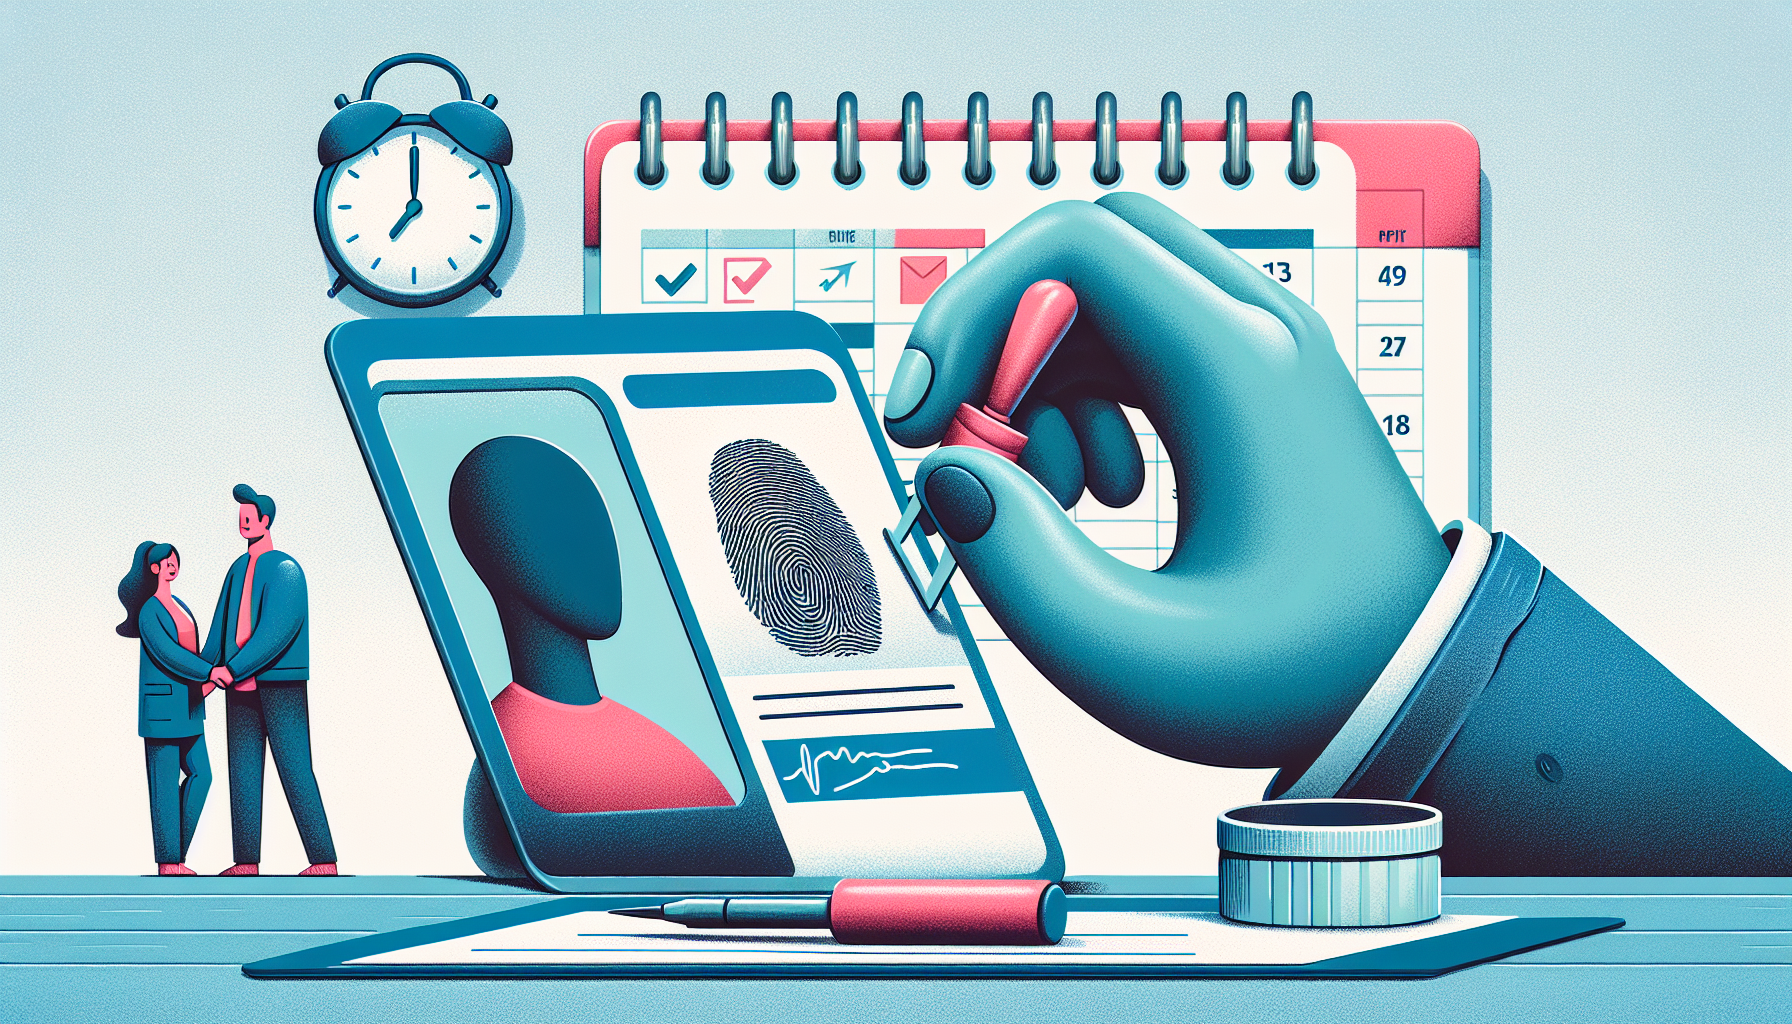 Illustration of tips for a smooth fingerprinting experience